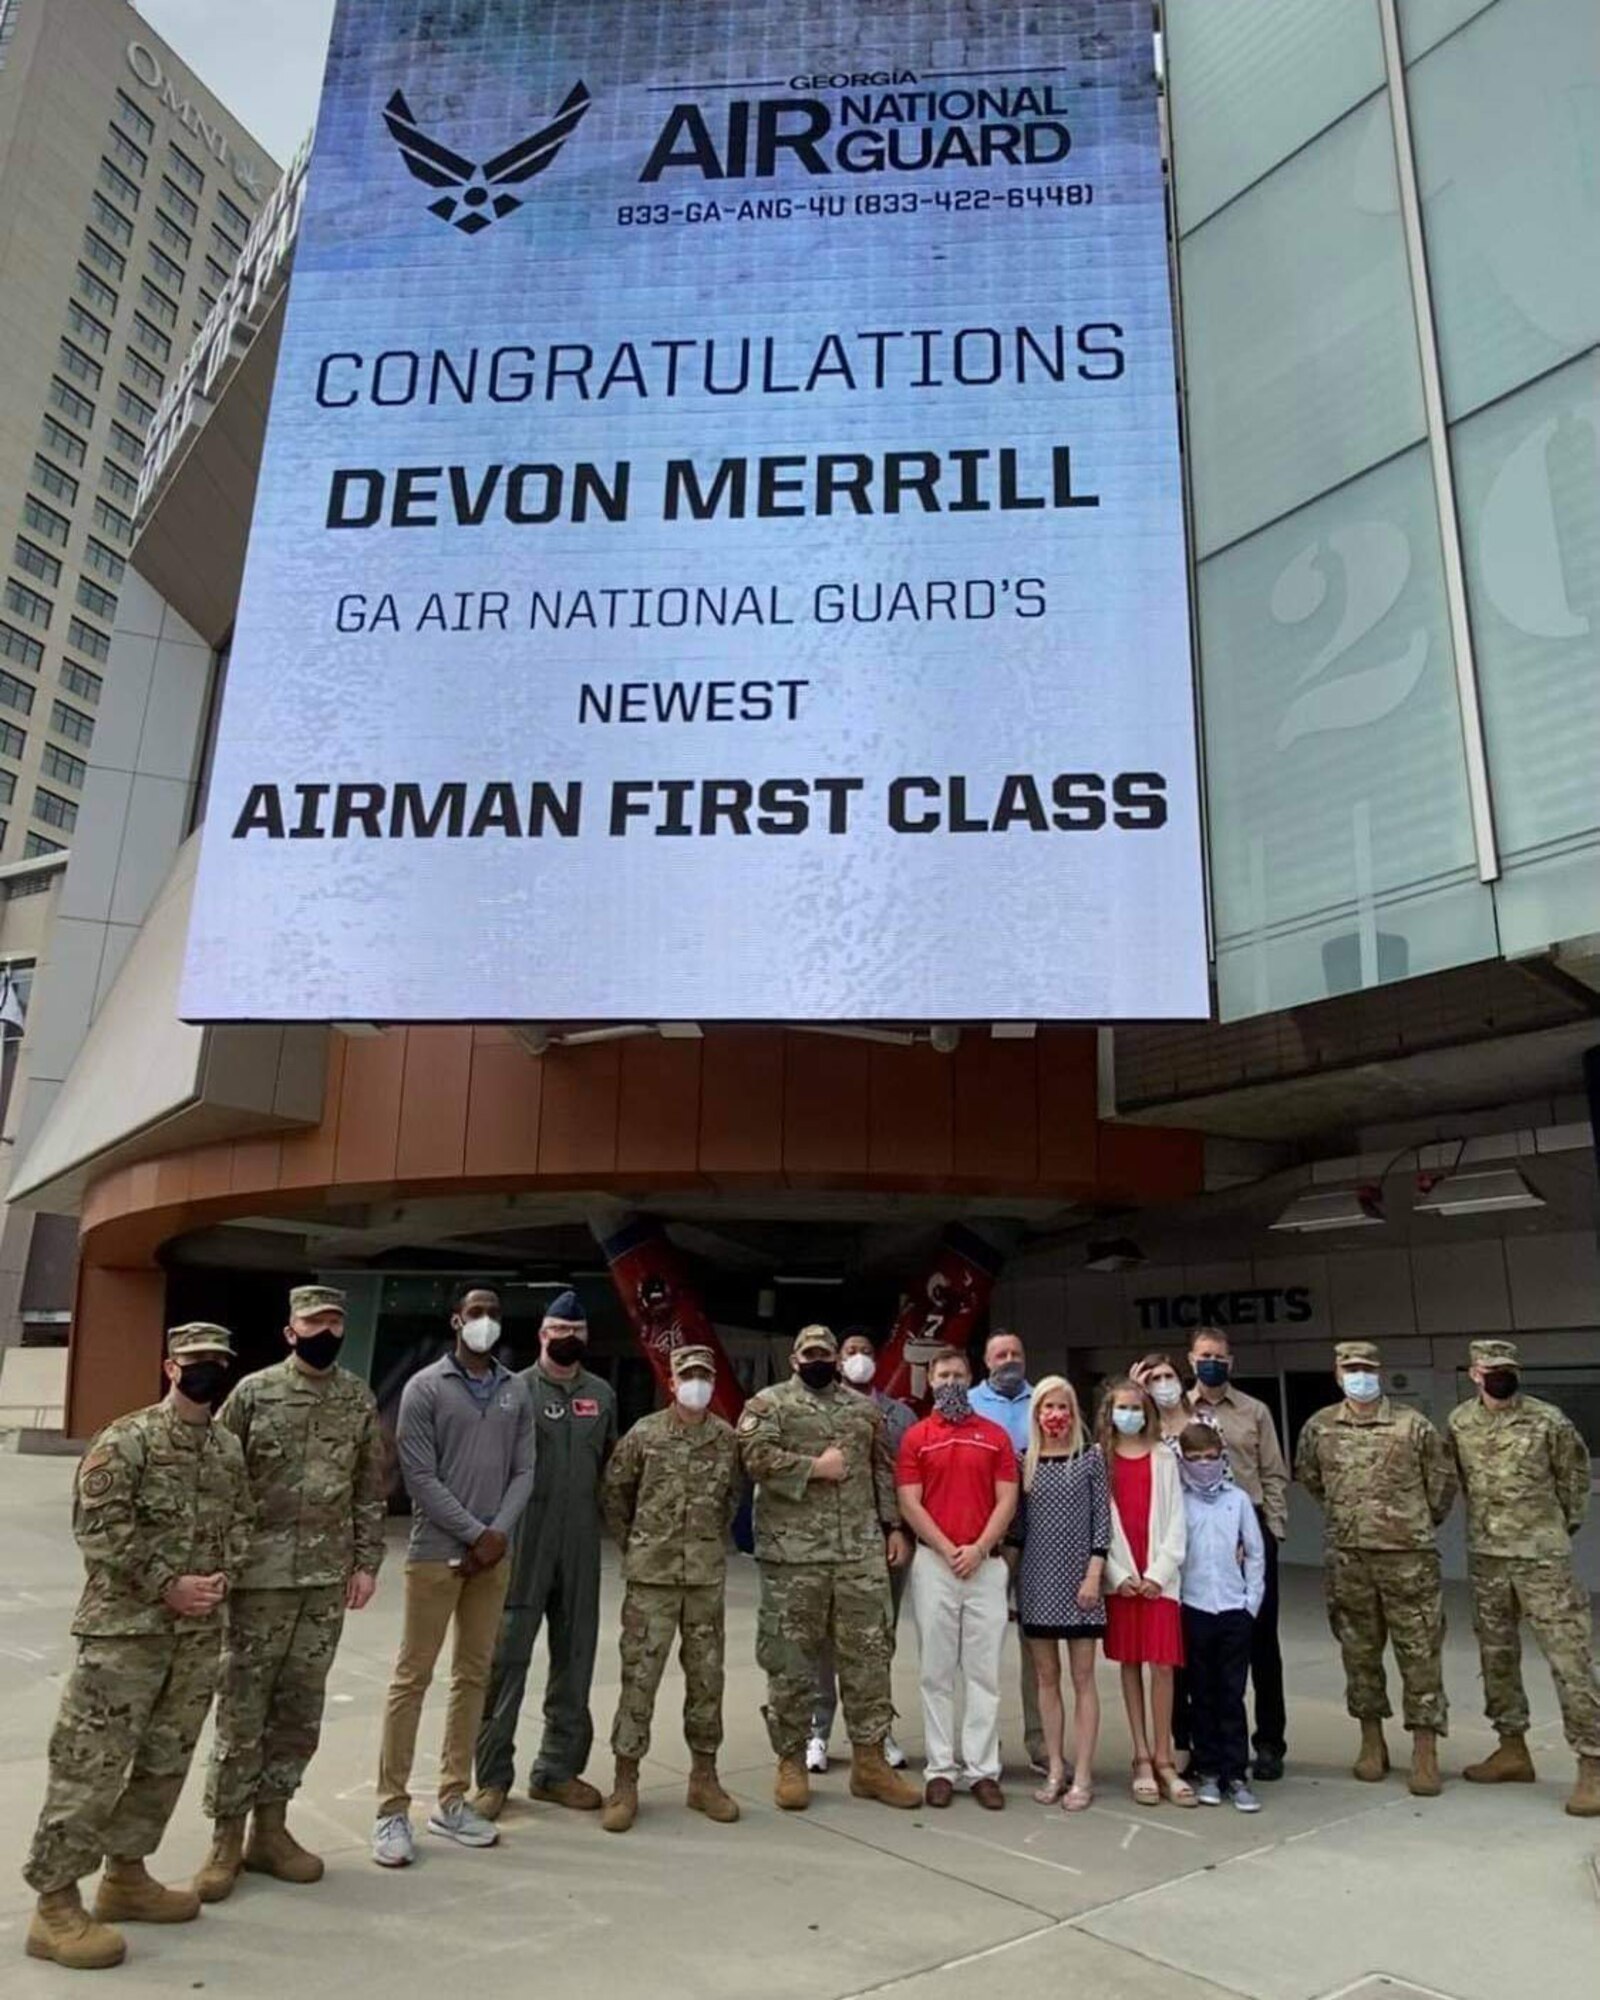 Air Force Recruiting Service helped solidify its partnership with the Chick-fil-A College Football Hall of Fame as Devon Miller, wearing the University of Georgia colors, was the first person to be sworn-in at the HOF as part of the partnership.